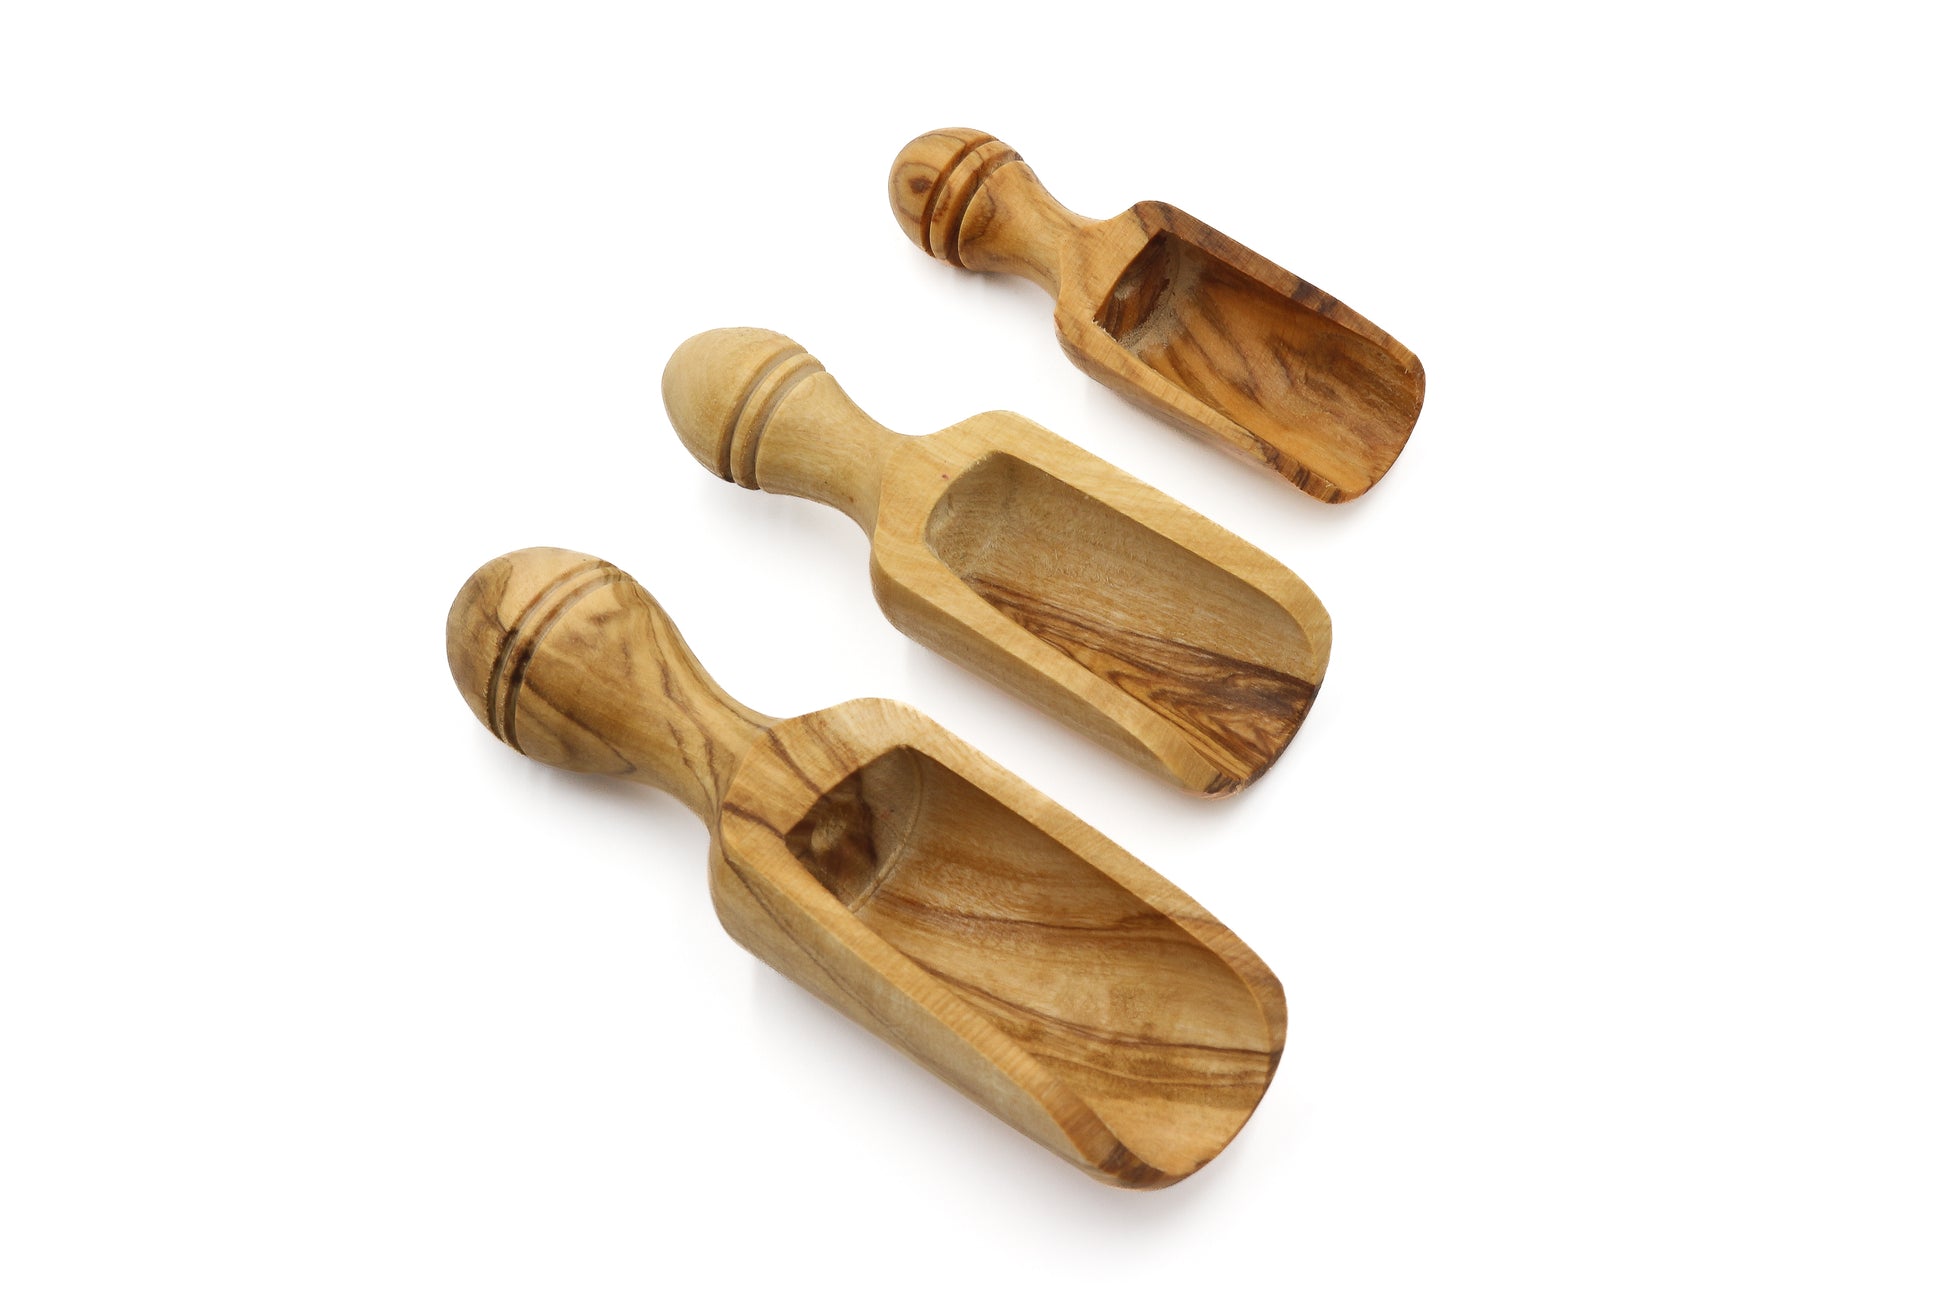 Explore the beauty of olive wood with our scoops and measuring spoons